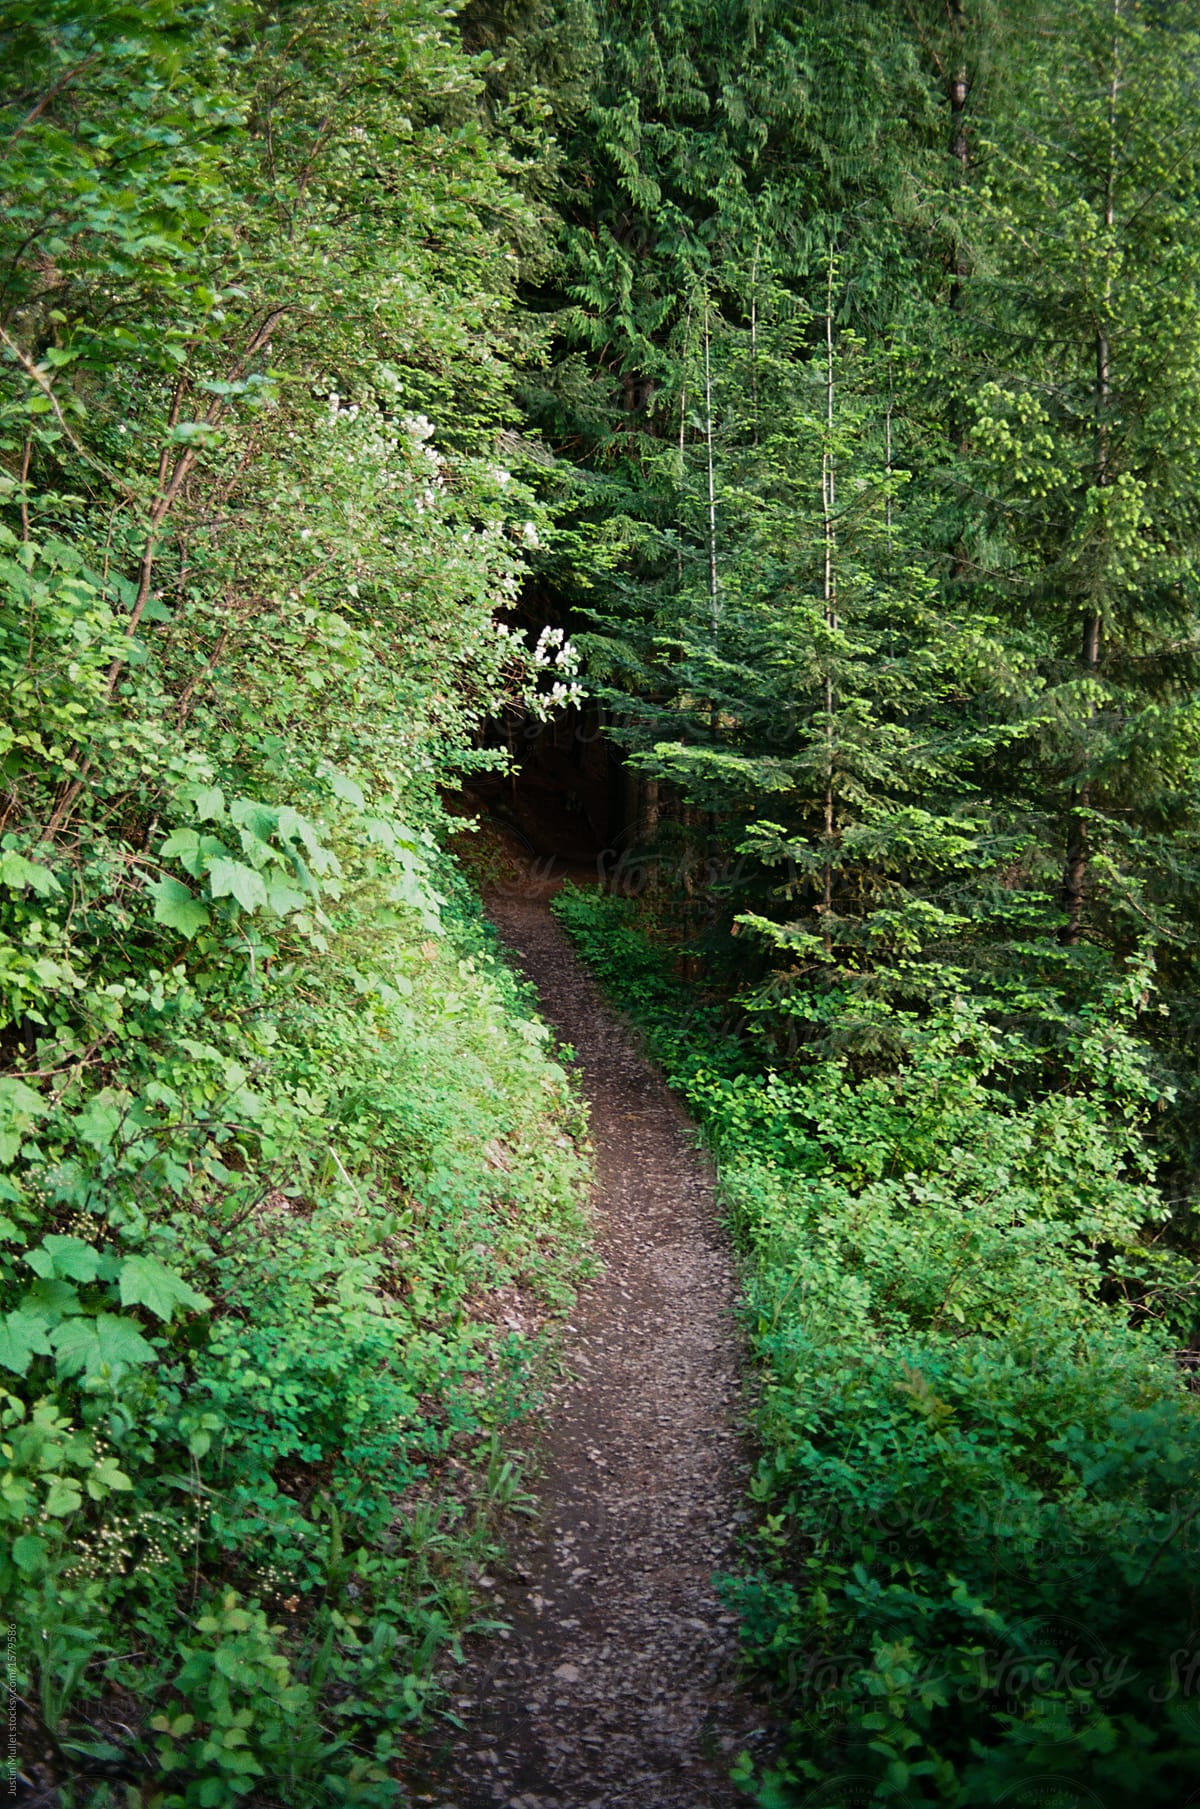 Hiking path leading into a thick forest.